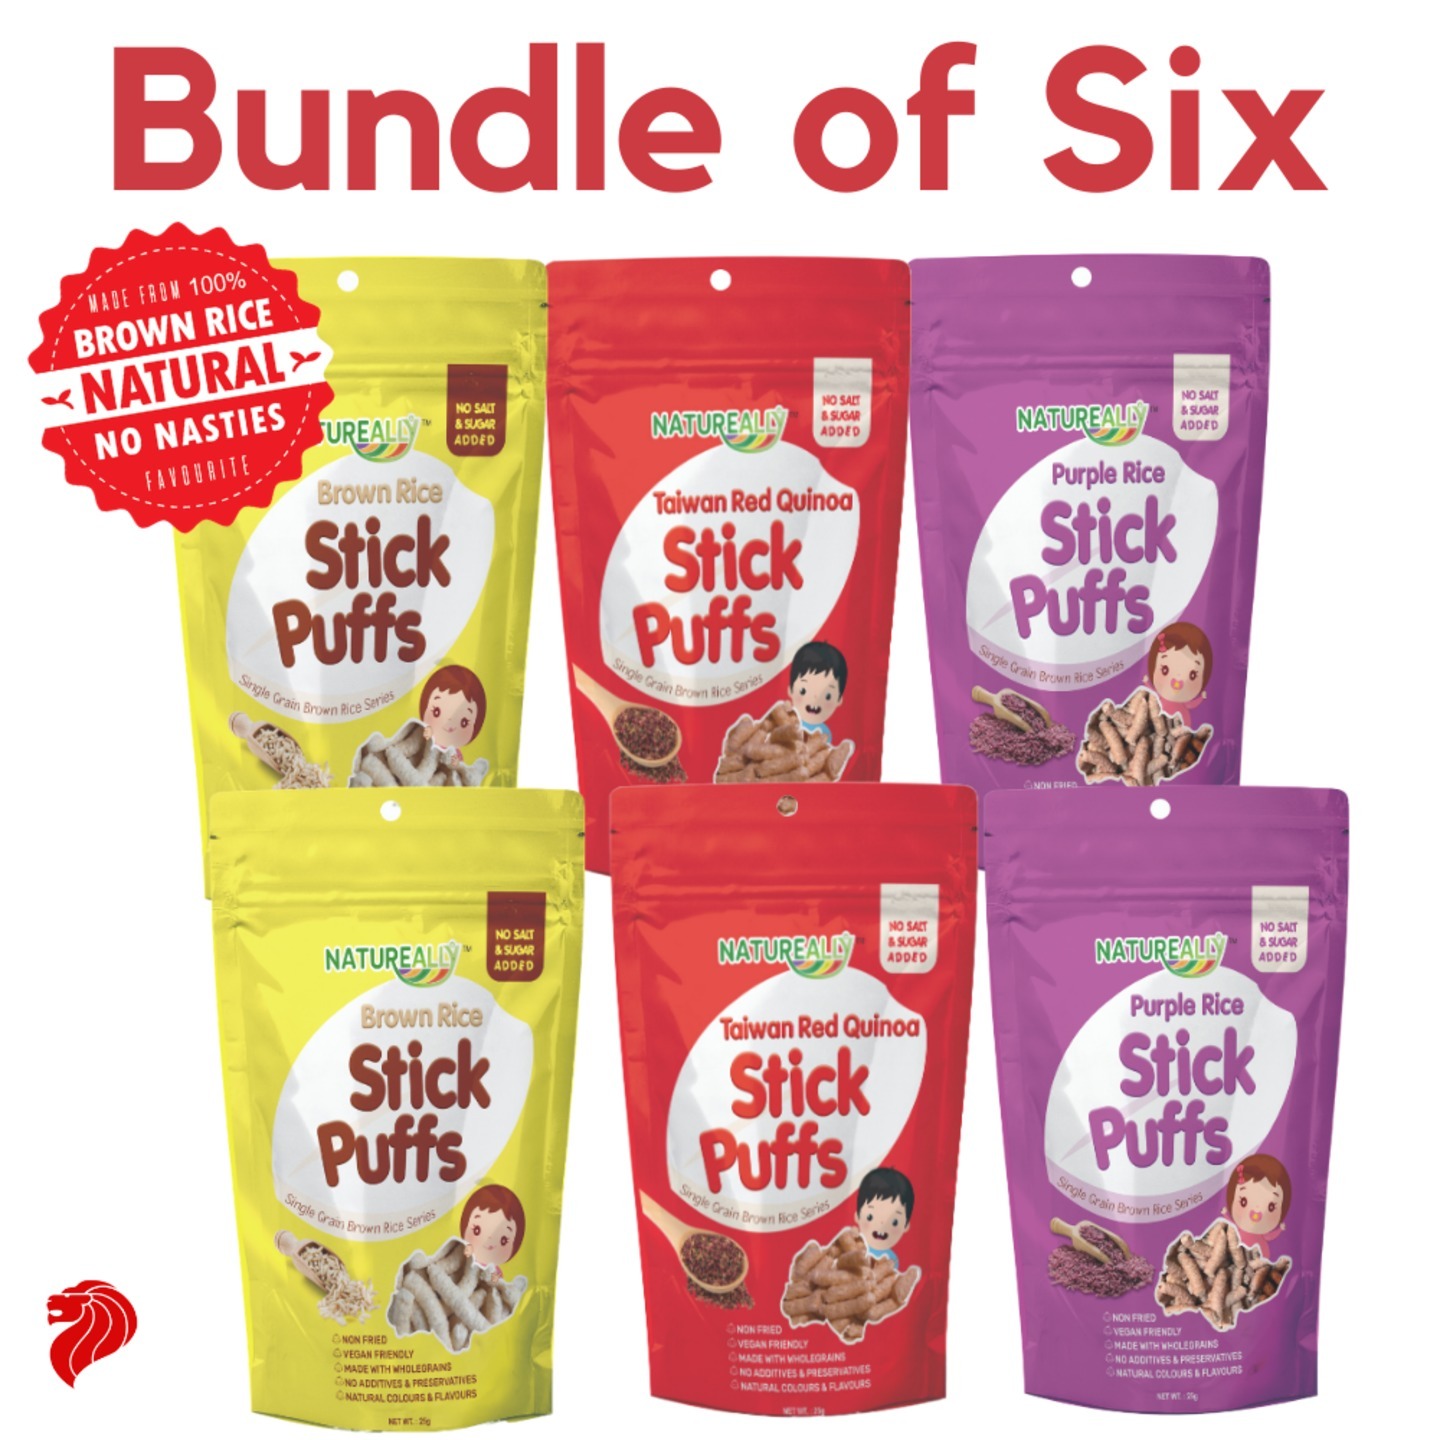 Value Pack Of 6x25G NATUREALLY STICK Puffs No Sugar and Salt Added 6M+